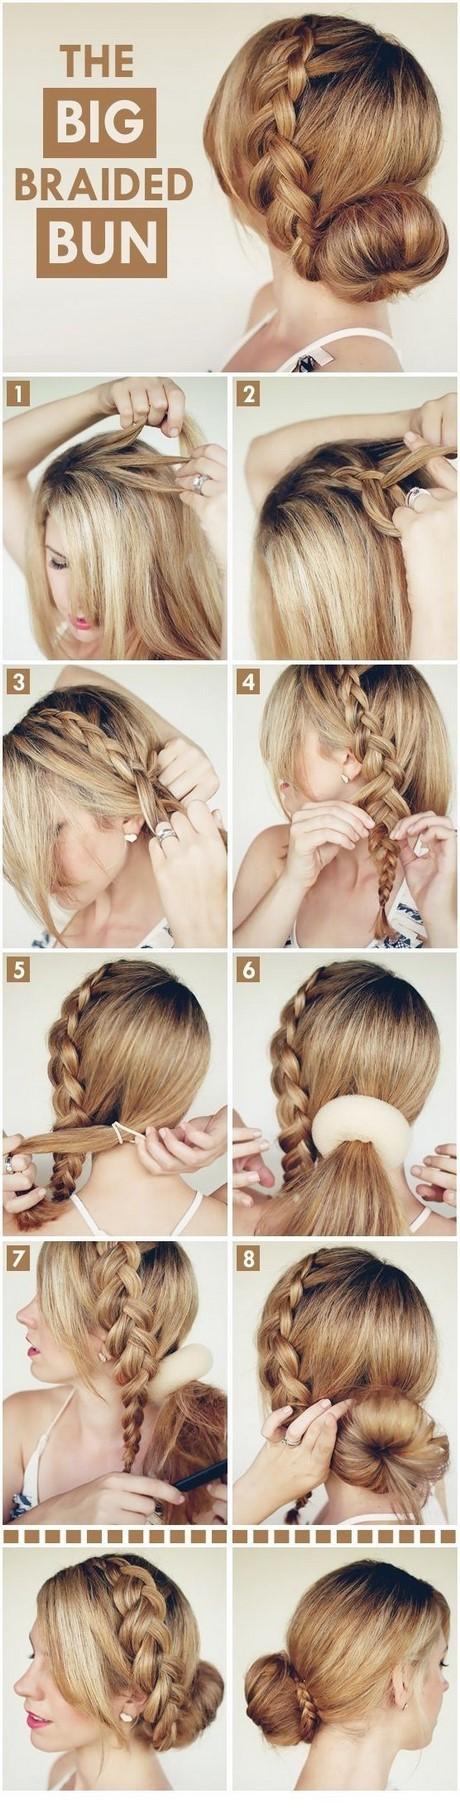 Quick easy braided hairstyles quick-easy-braided-hairstyles-24_5